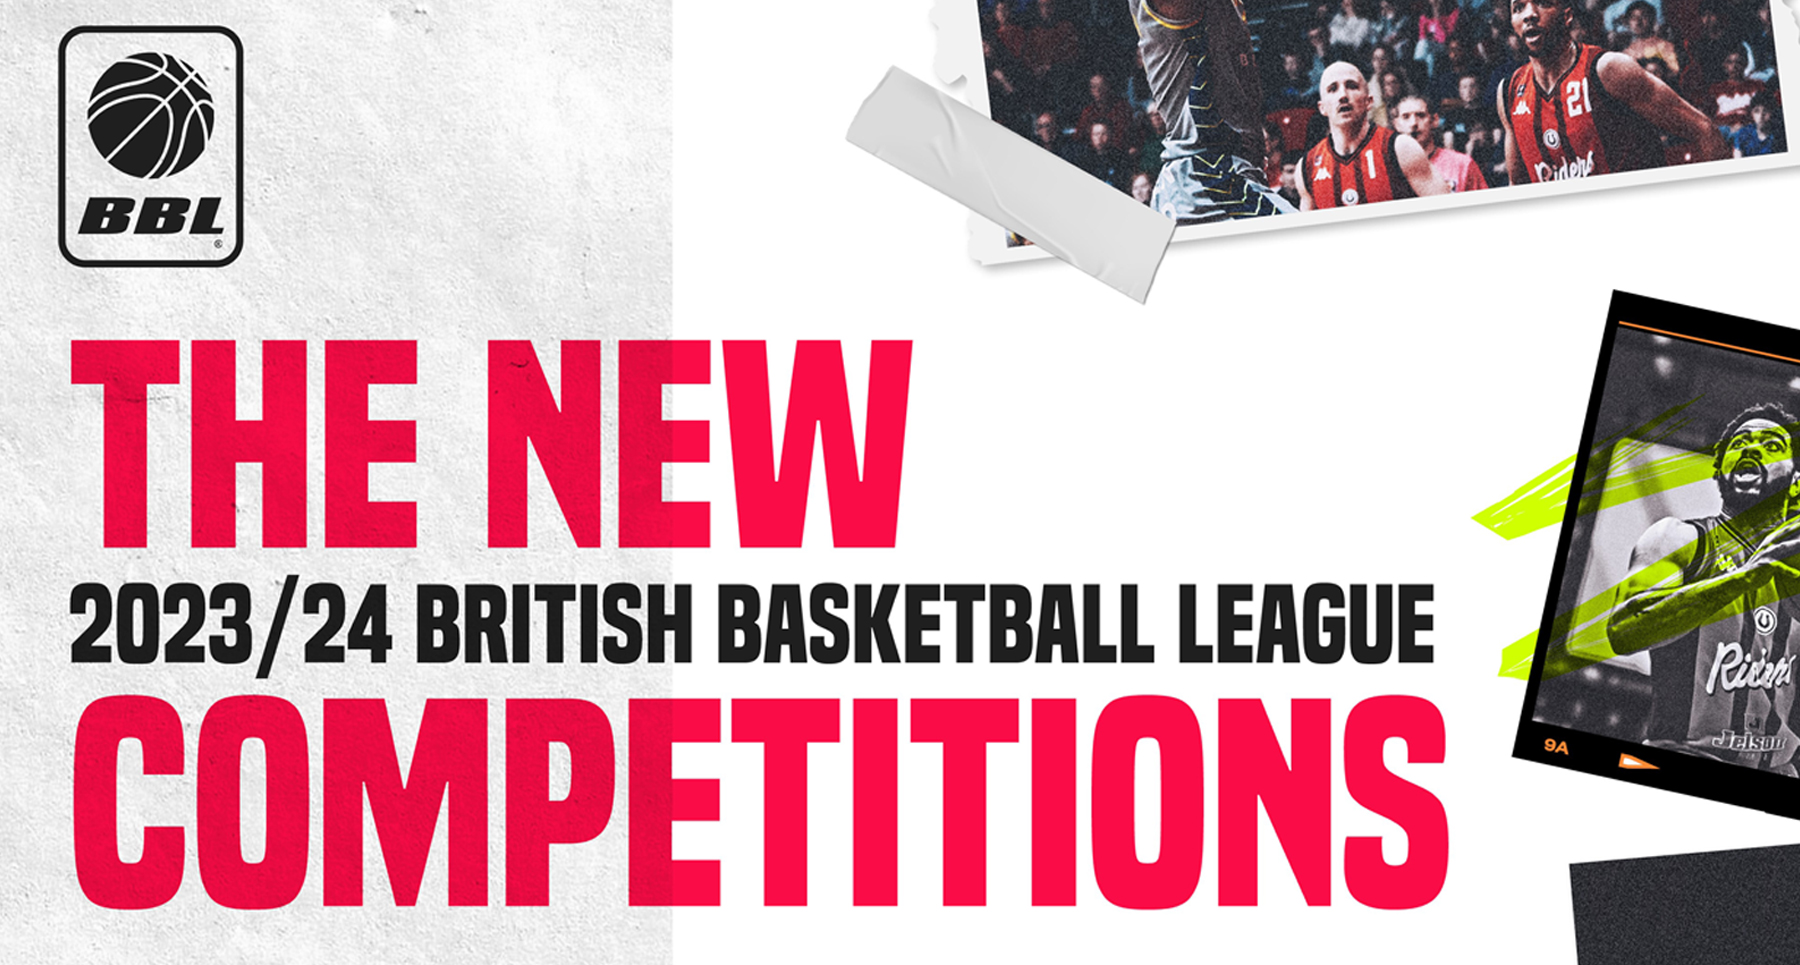 The British Basketball League Announces Exciting New Formats for the 2023/24 Season